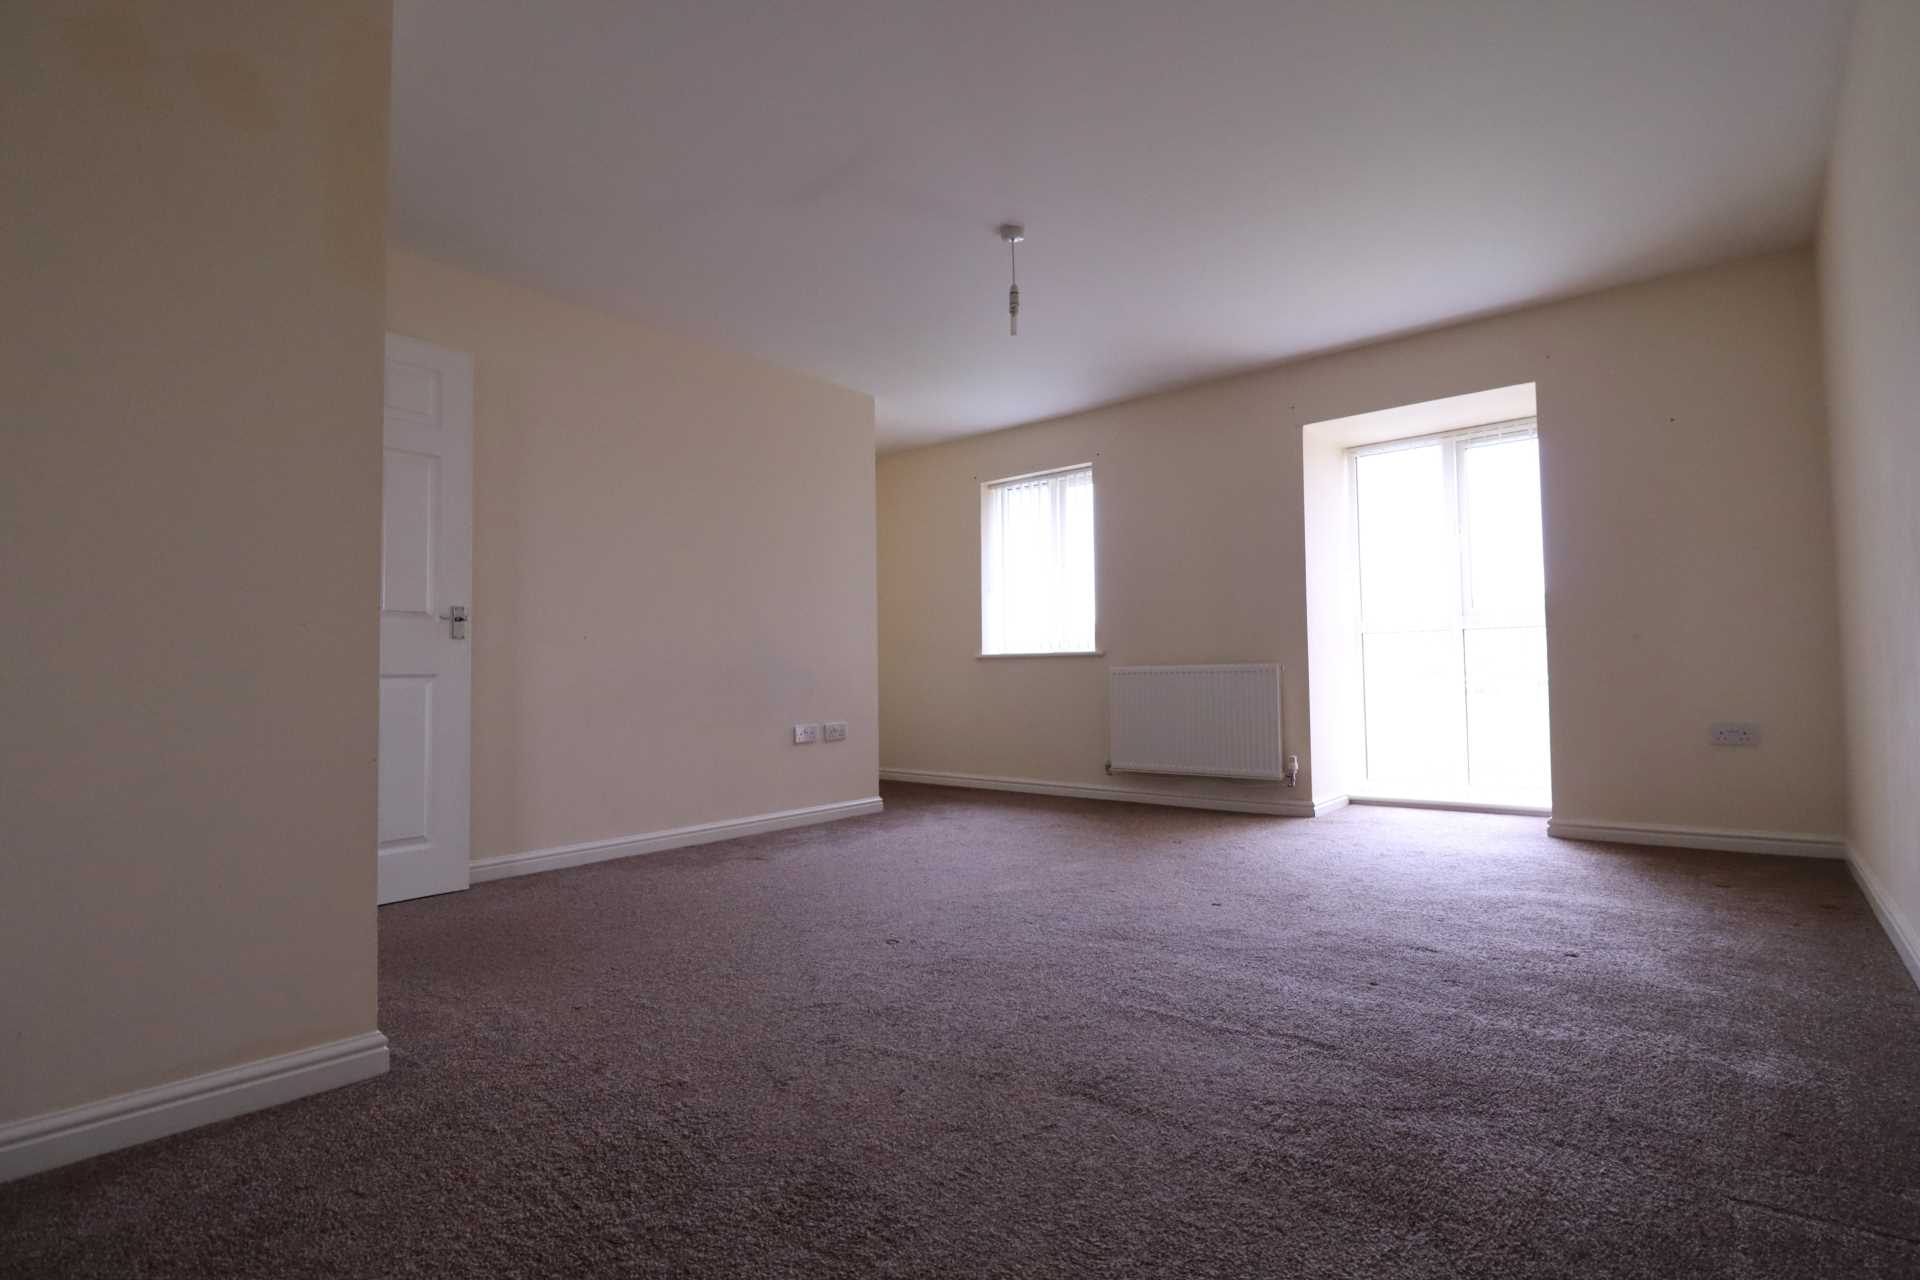 Haywood Village - Vacant - 4 Bedroom Town House, Image 14